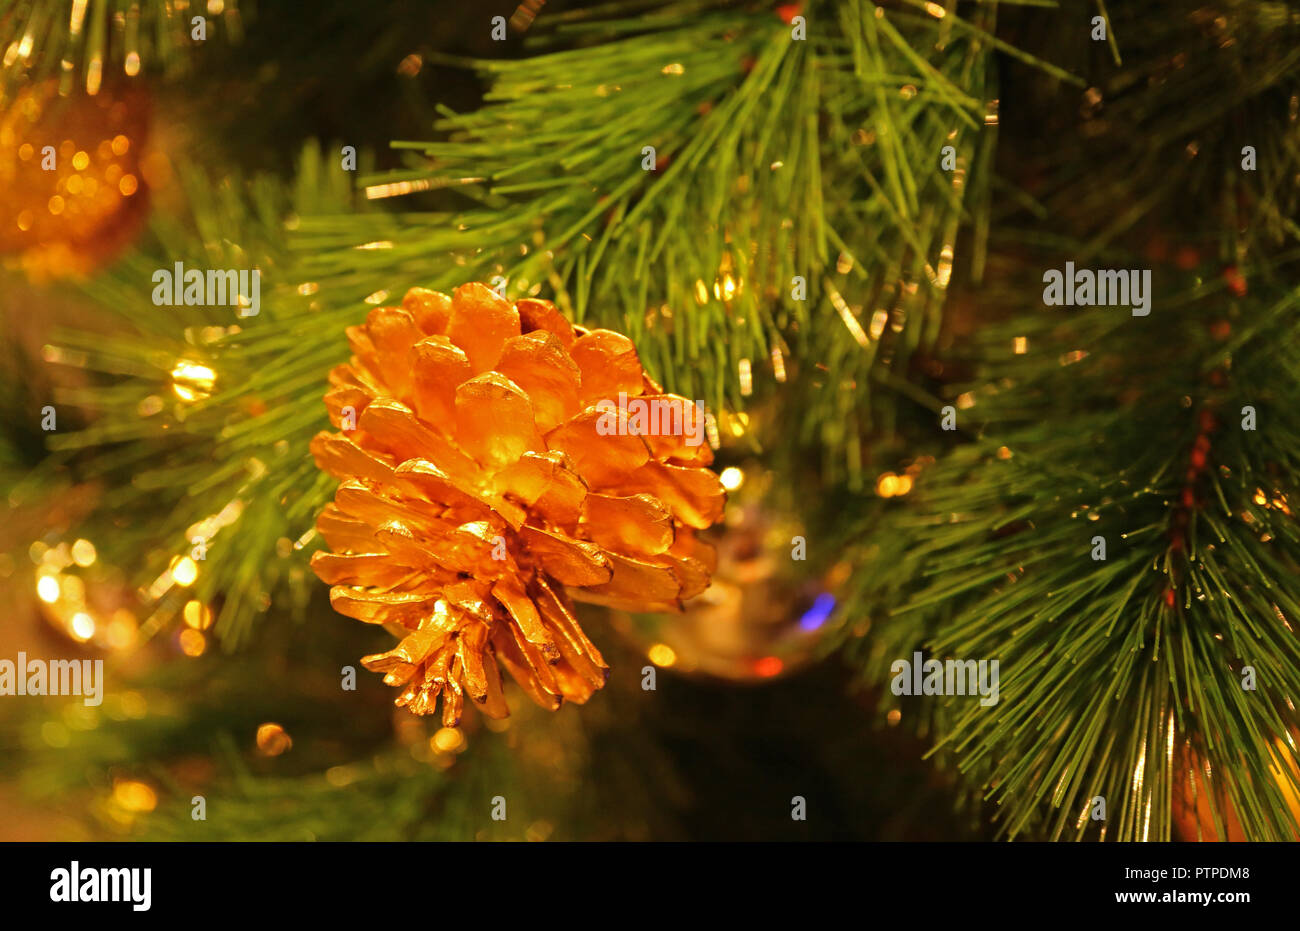 Dry pine cone ornament in shiny gold colored hanging on sparkling Christmas tree Stock Photo